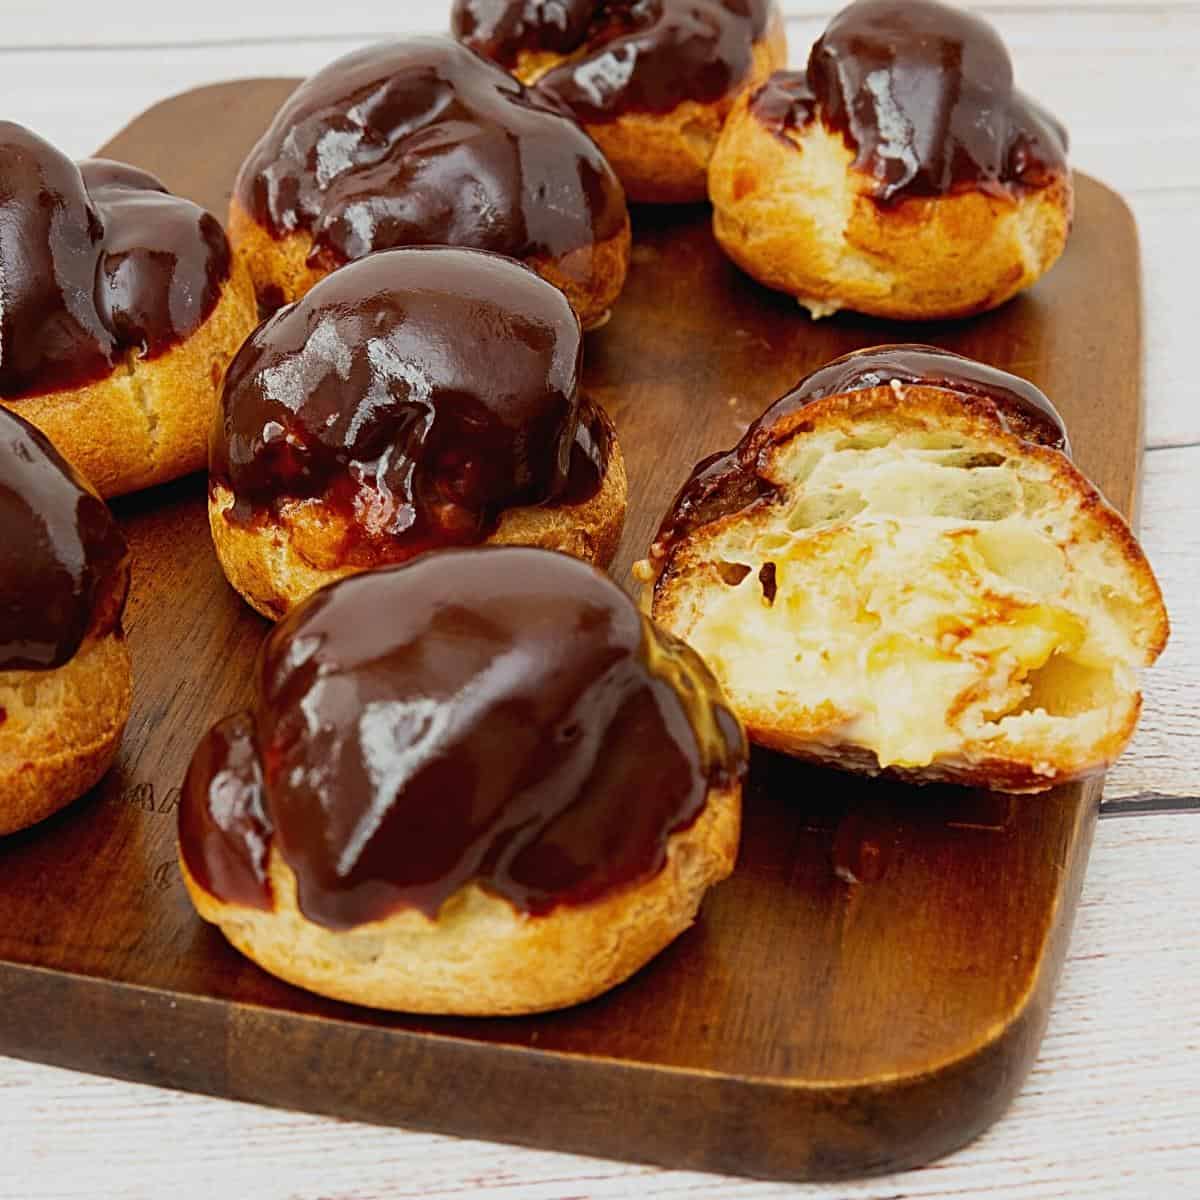 Chocolate glazed profiterole filled with pastry cream.